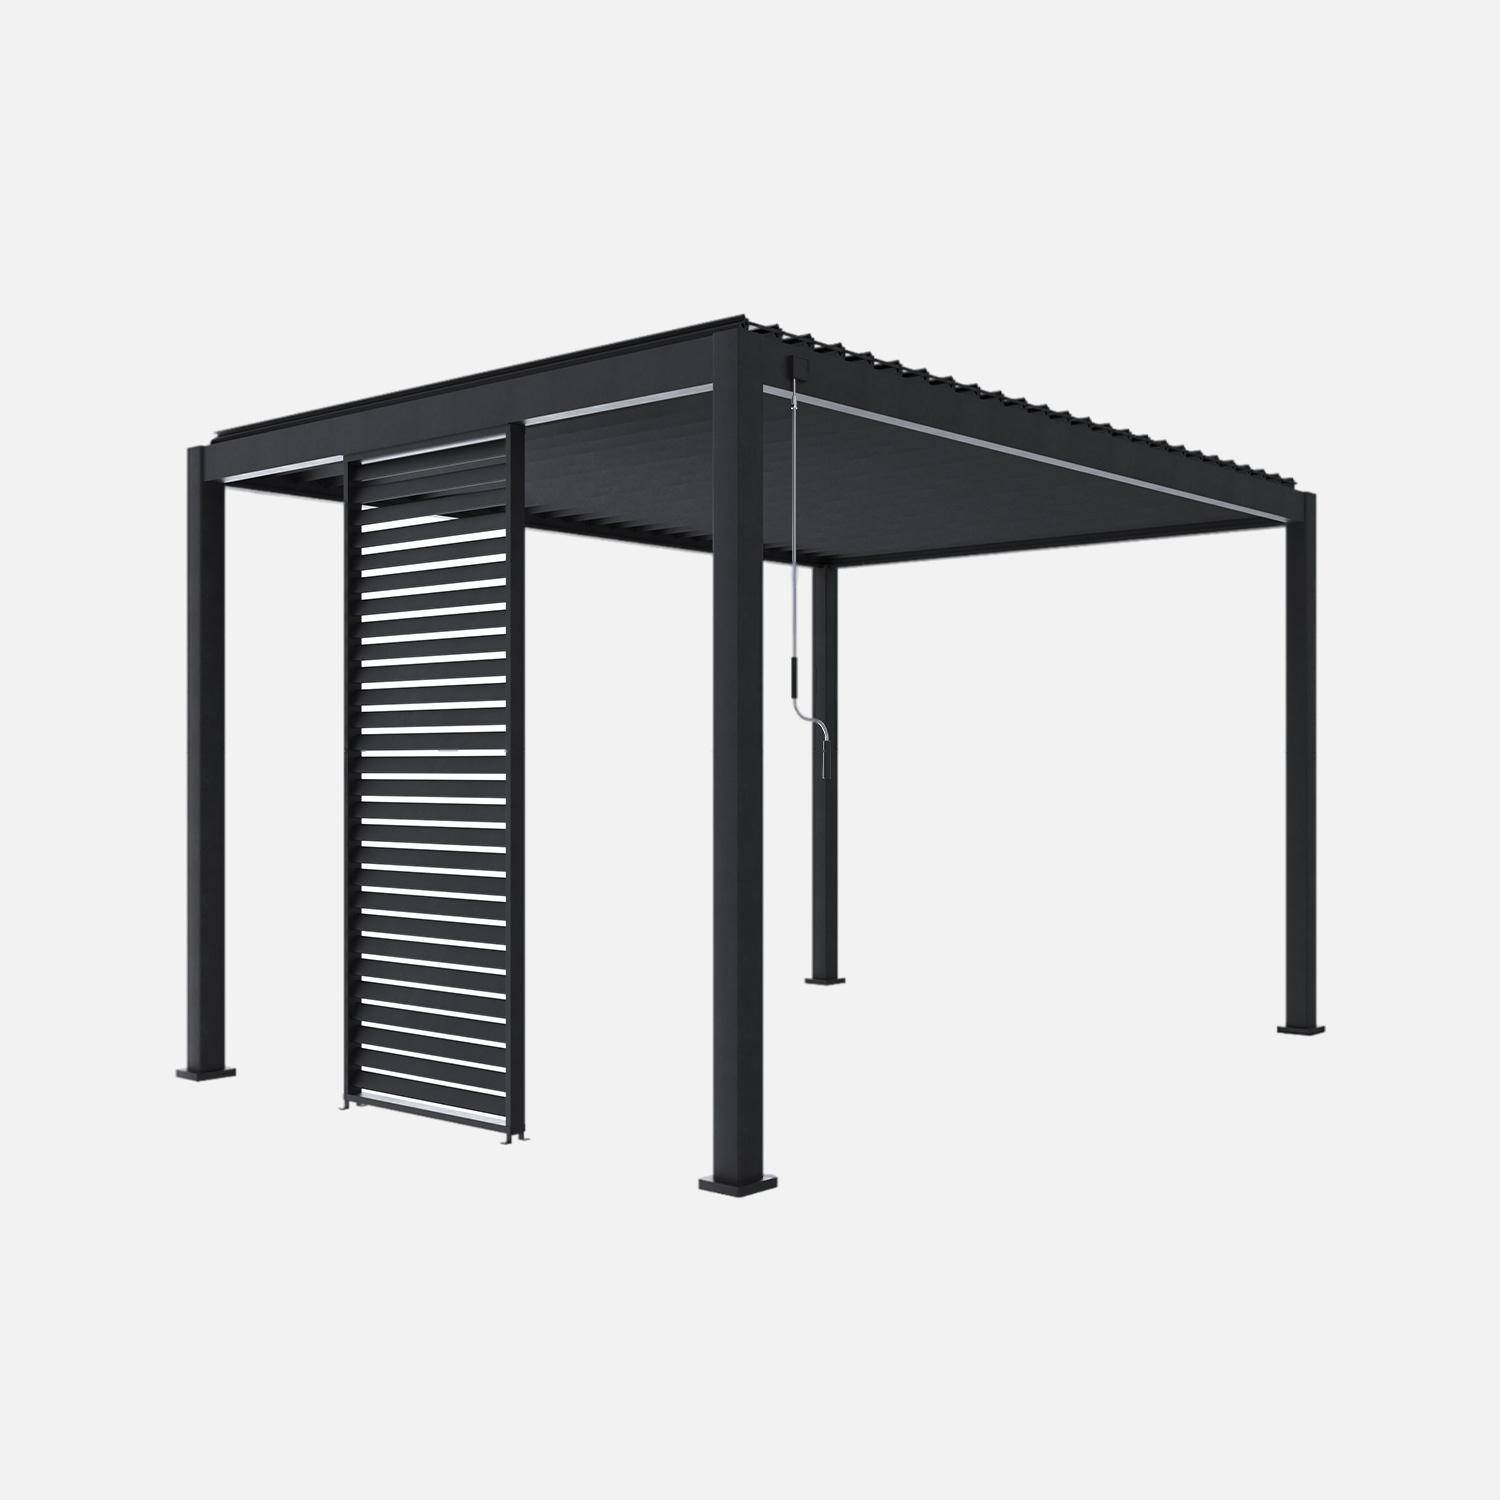 100cm Aluminium anthracite side panel for triomphe louvered pergola (3x4 and 3x3v2),sweeek,Photo4